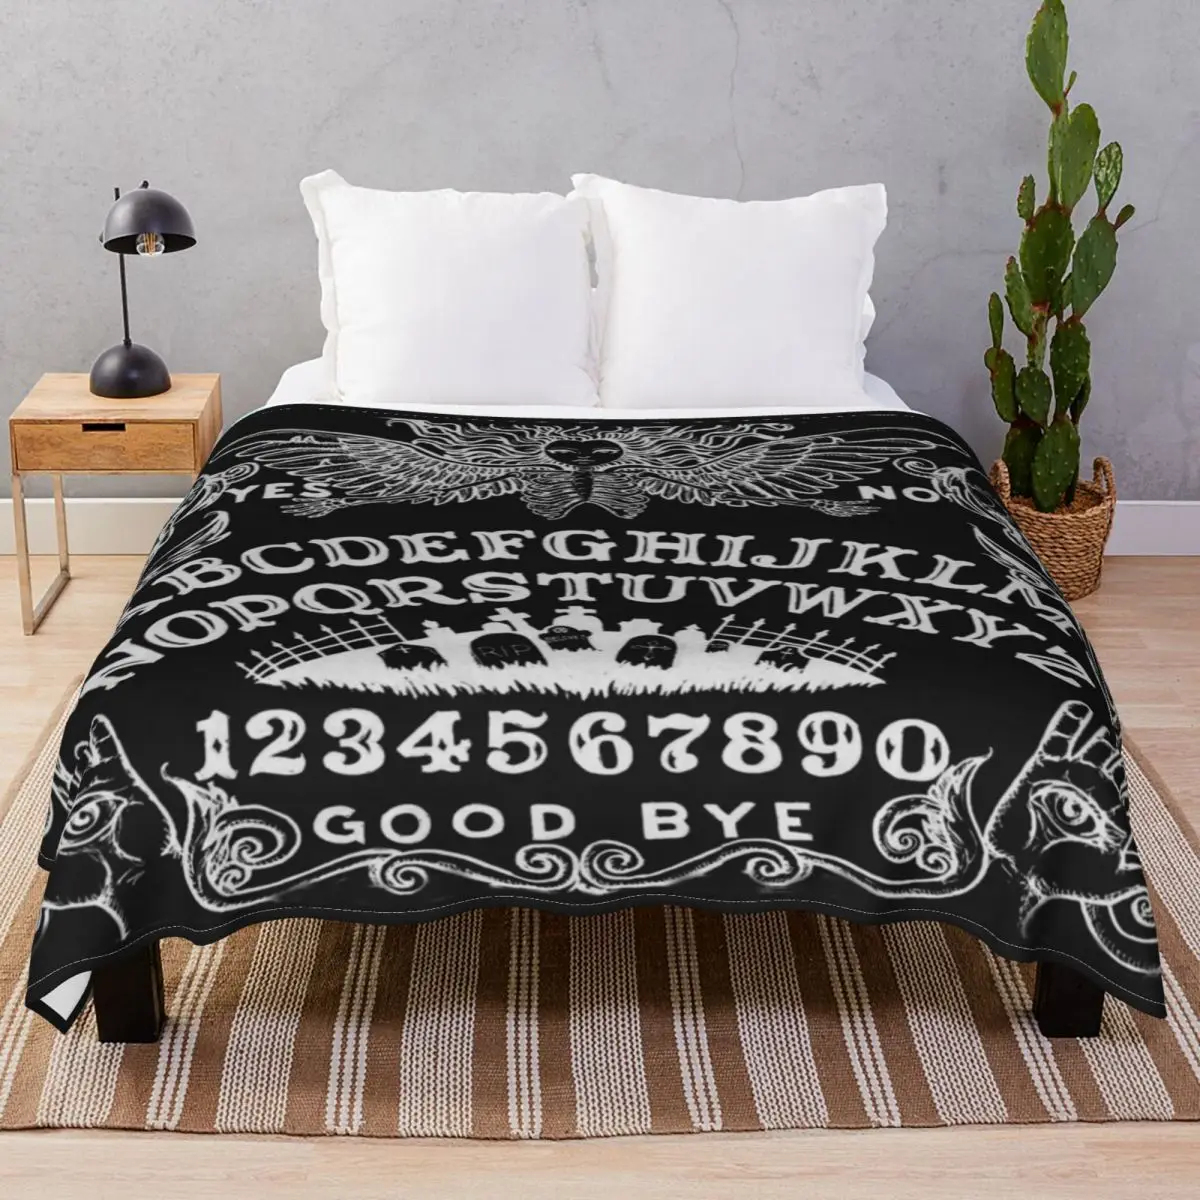 Black Witch Board Blanket Flannel Autumn/Winter Super Warm Throw Blankets for Bed Home Couch Travel Cinema